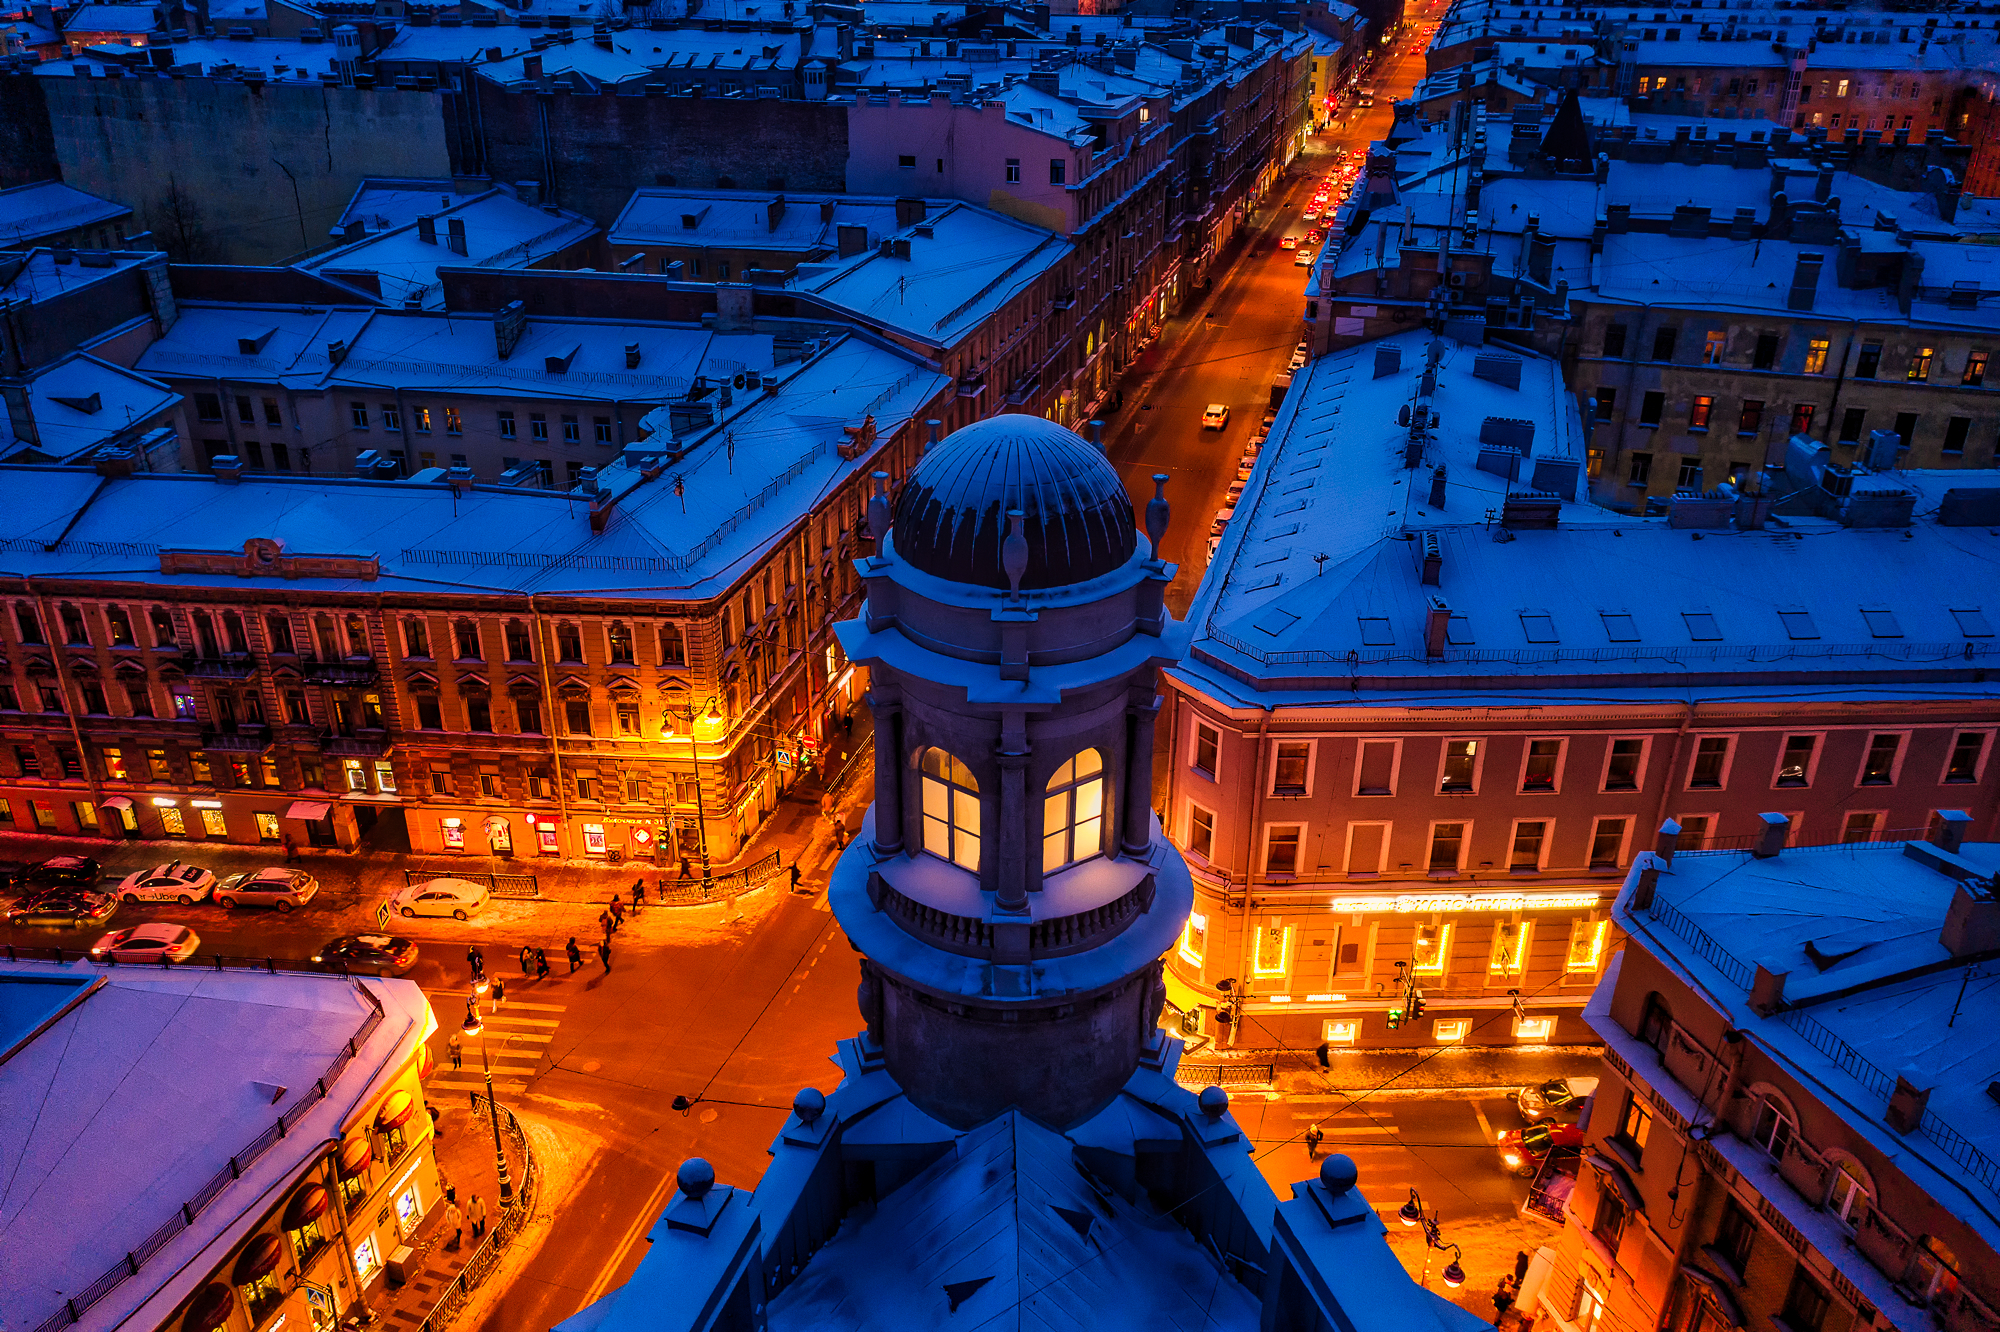 General 2000x1332 night city cityscape winter snow covered snow car people street Yuri Stolypin photography urban architecture Russia St. Petersburg